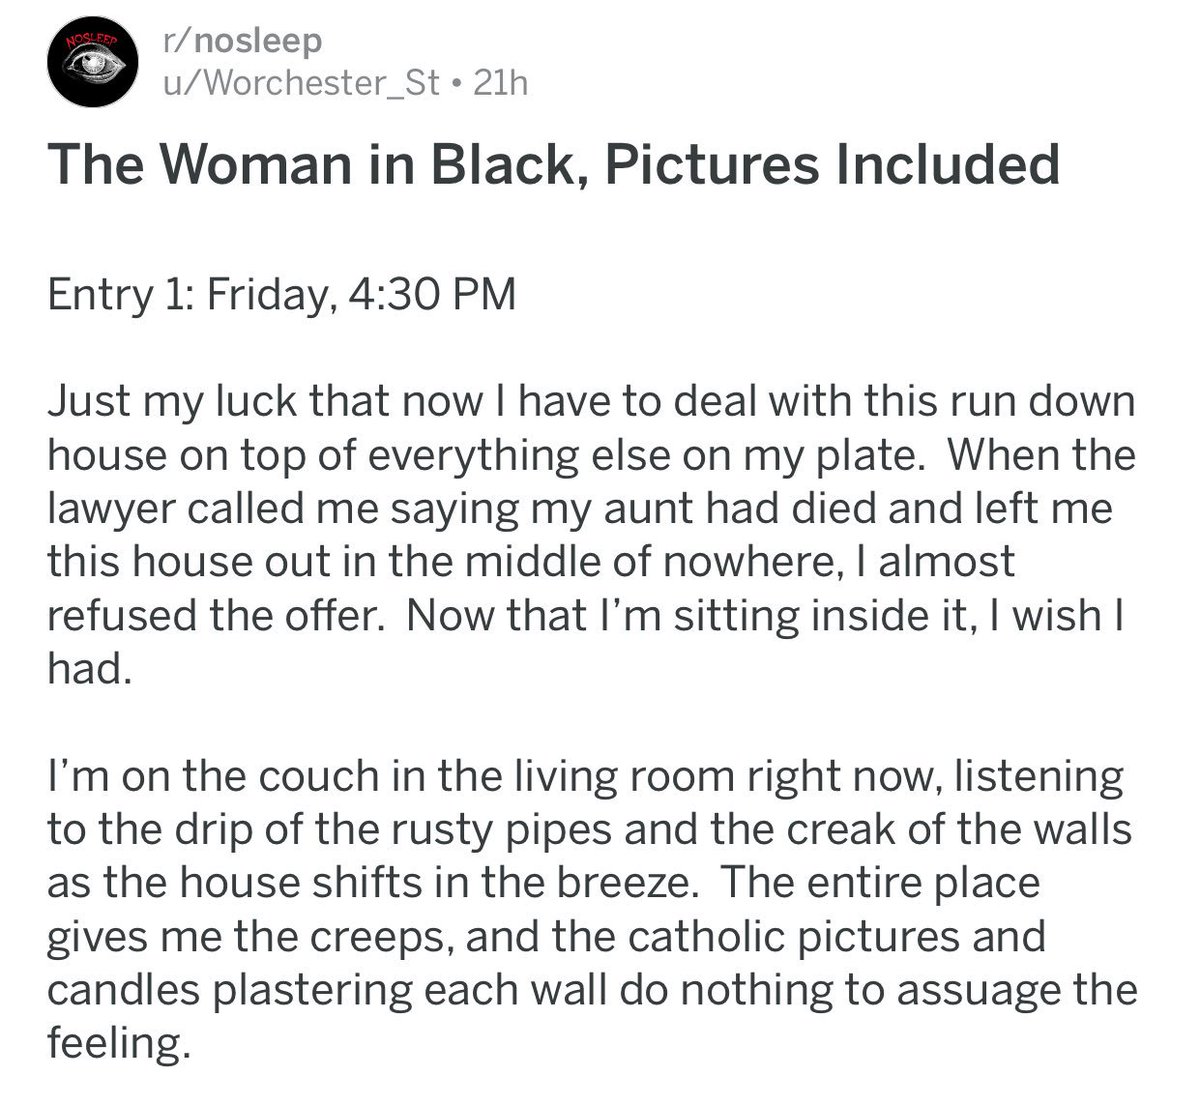 ↳ The woman in black (there’s a creepy photo ){ https://www.reddit.com/r/nosleep/comments/7sthzs/the_woman_in_black_pictures_included/}